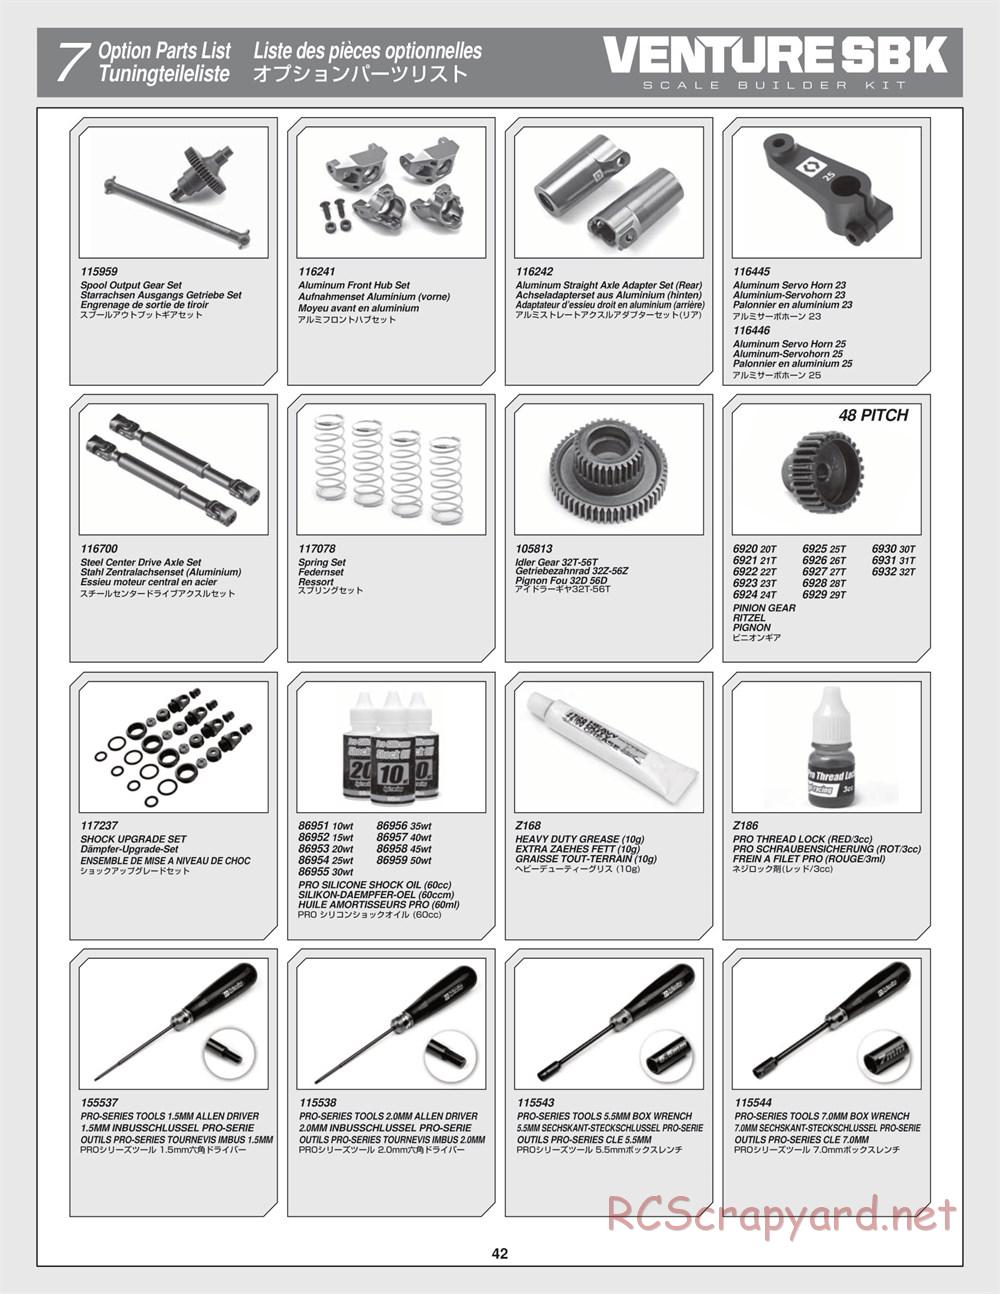 HPI - Venture SBK - Exploded View - Page 42